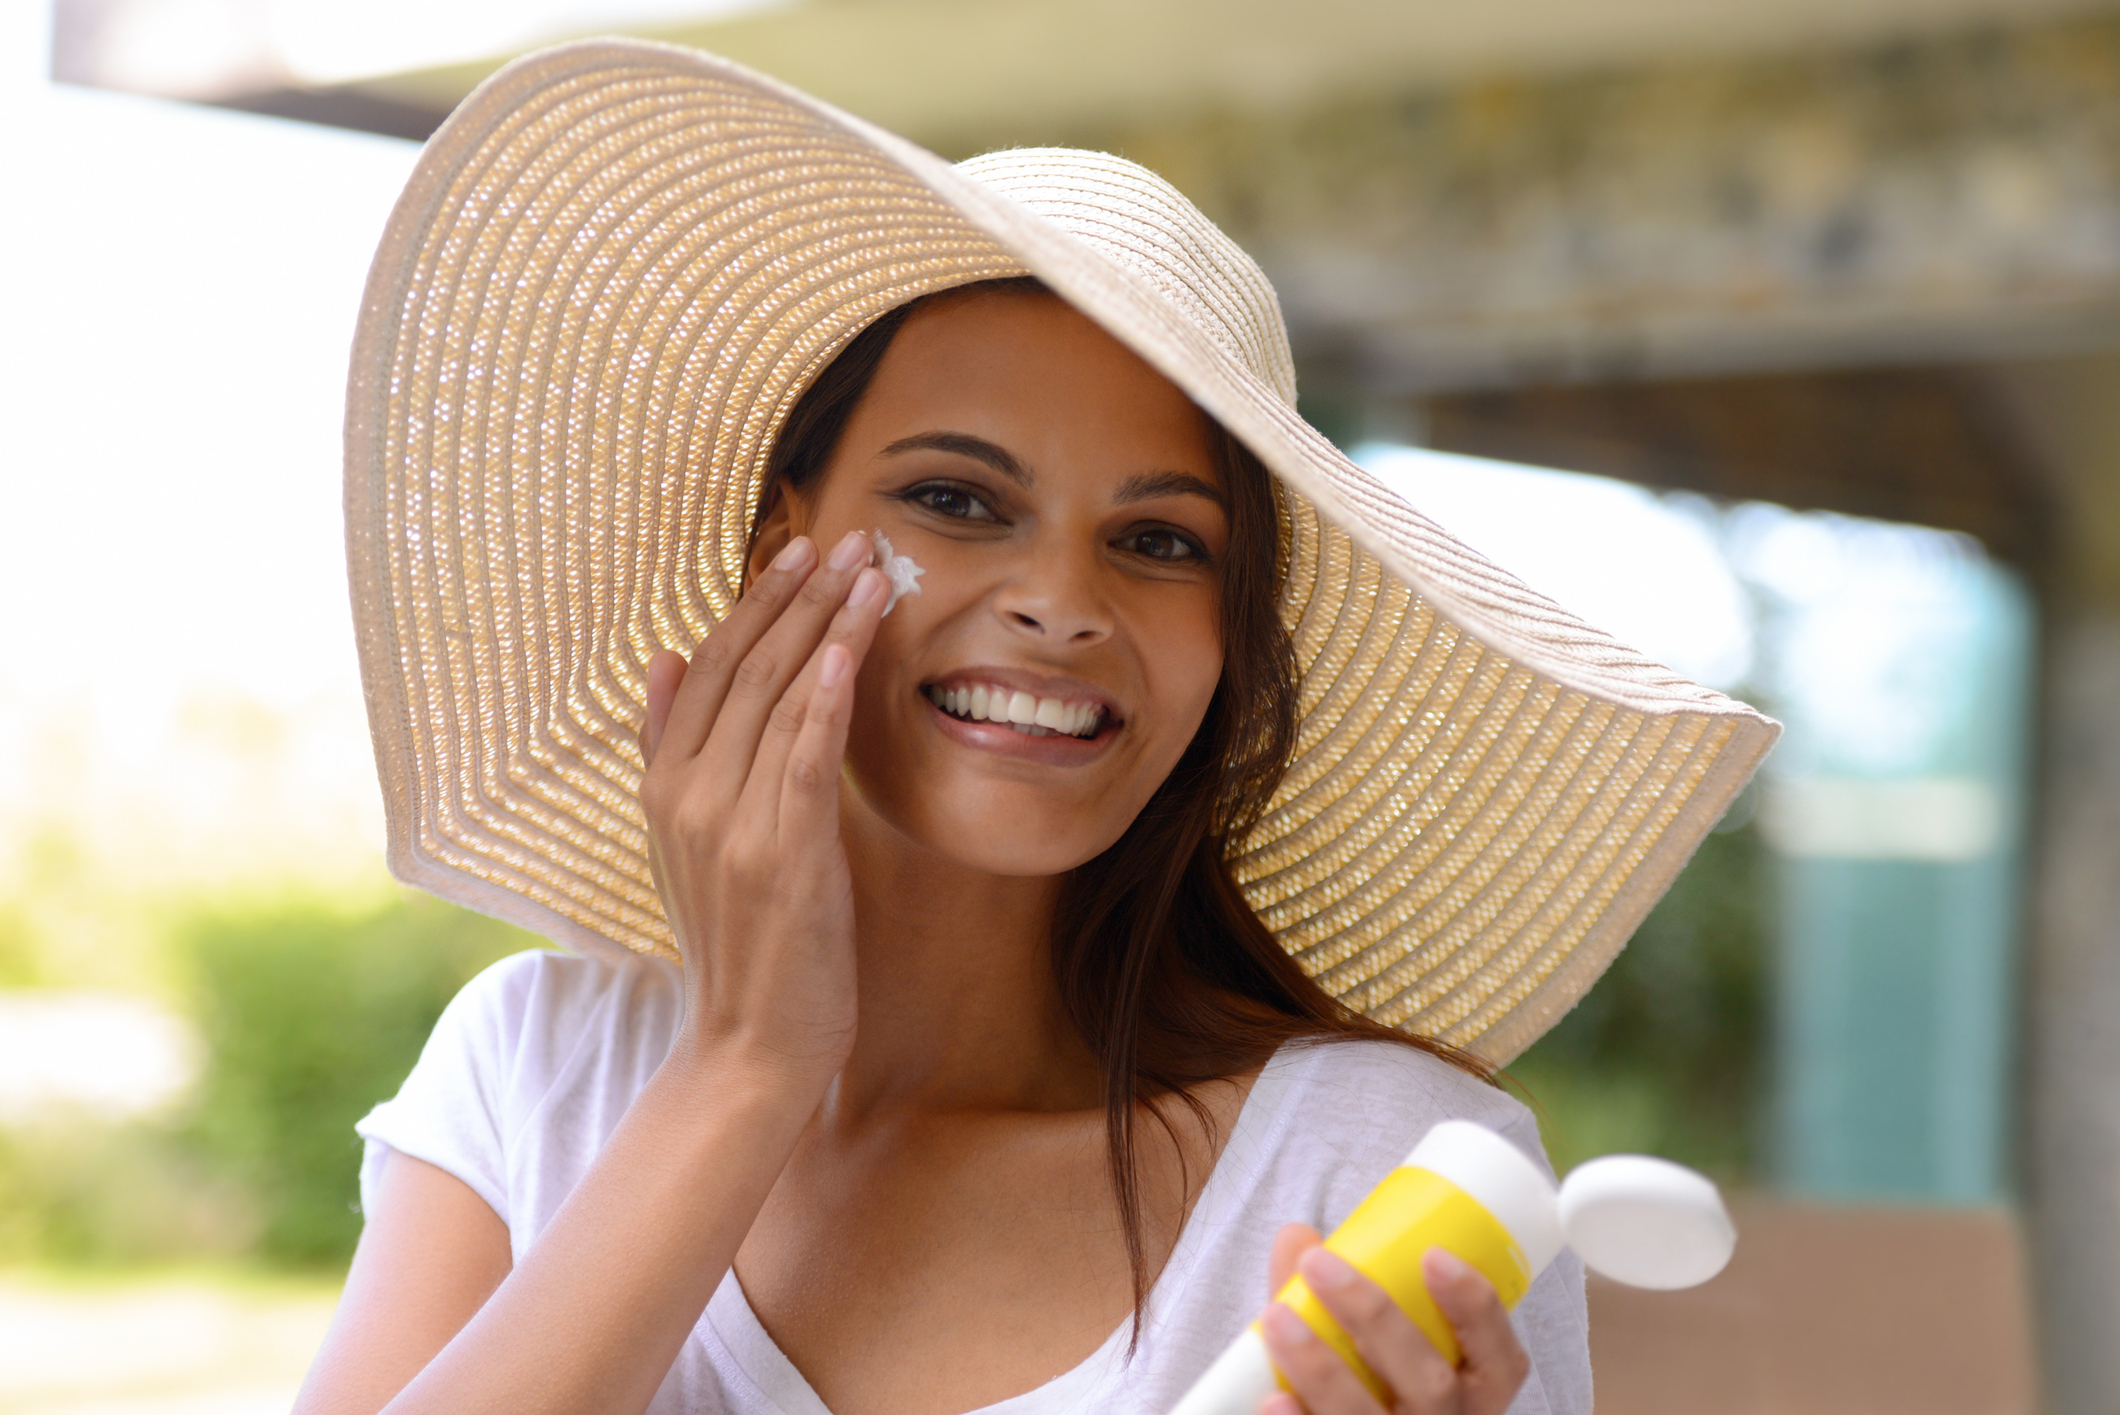 The summer heat brings uncomfortable variations to the skin of the face, hands and feet